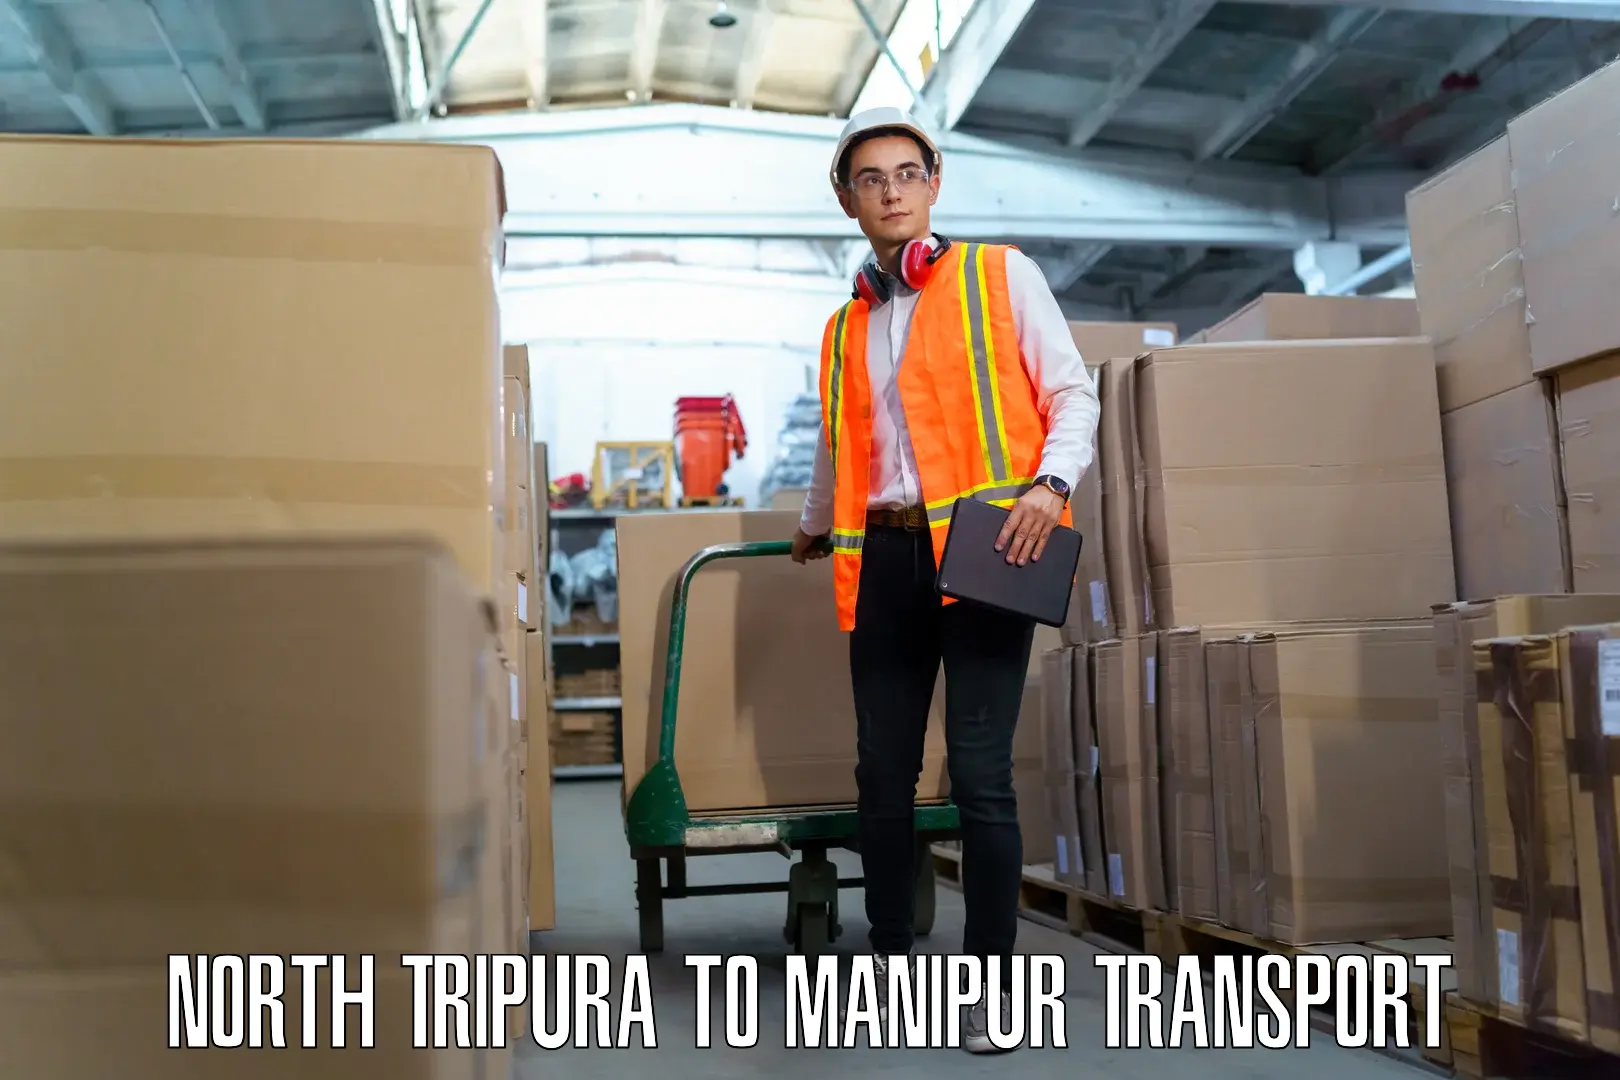 Vehicle transport services North Tripura to Manipur